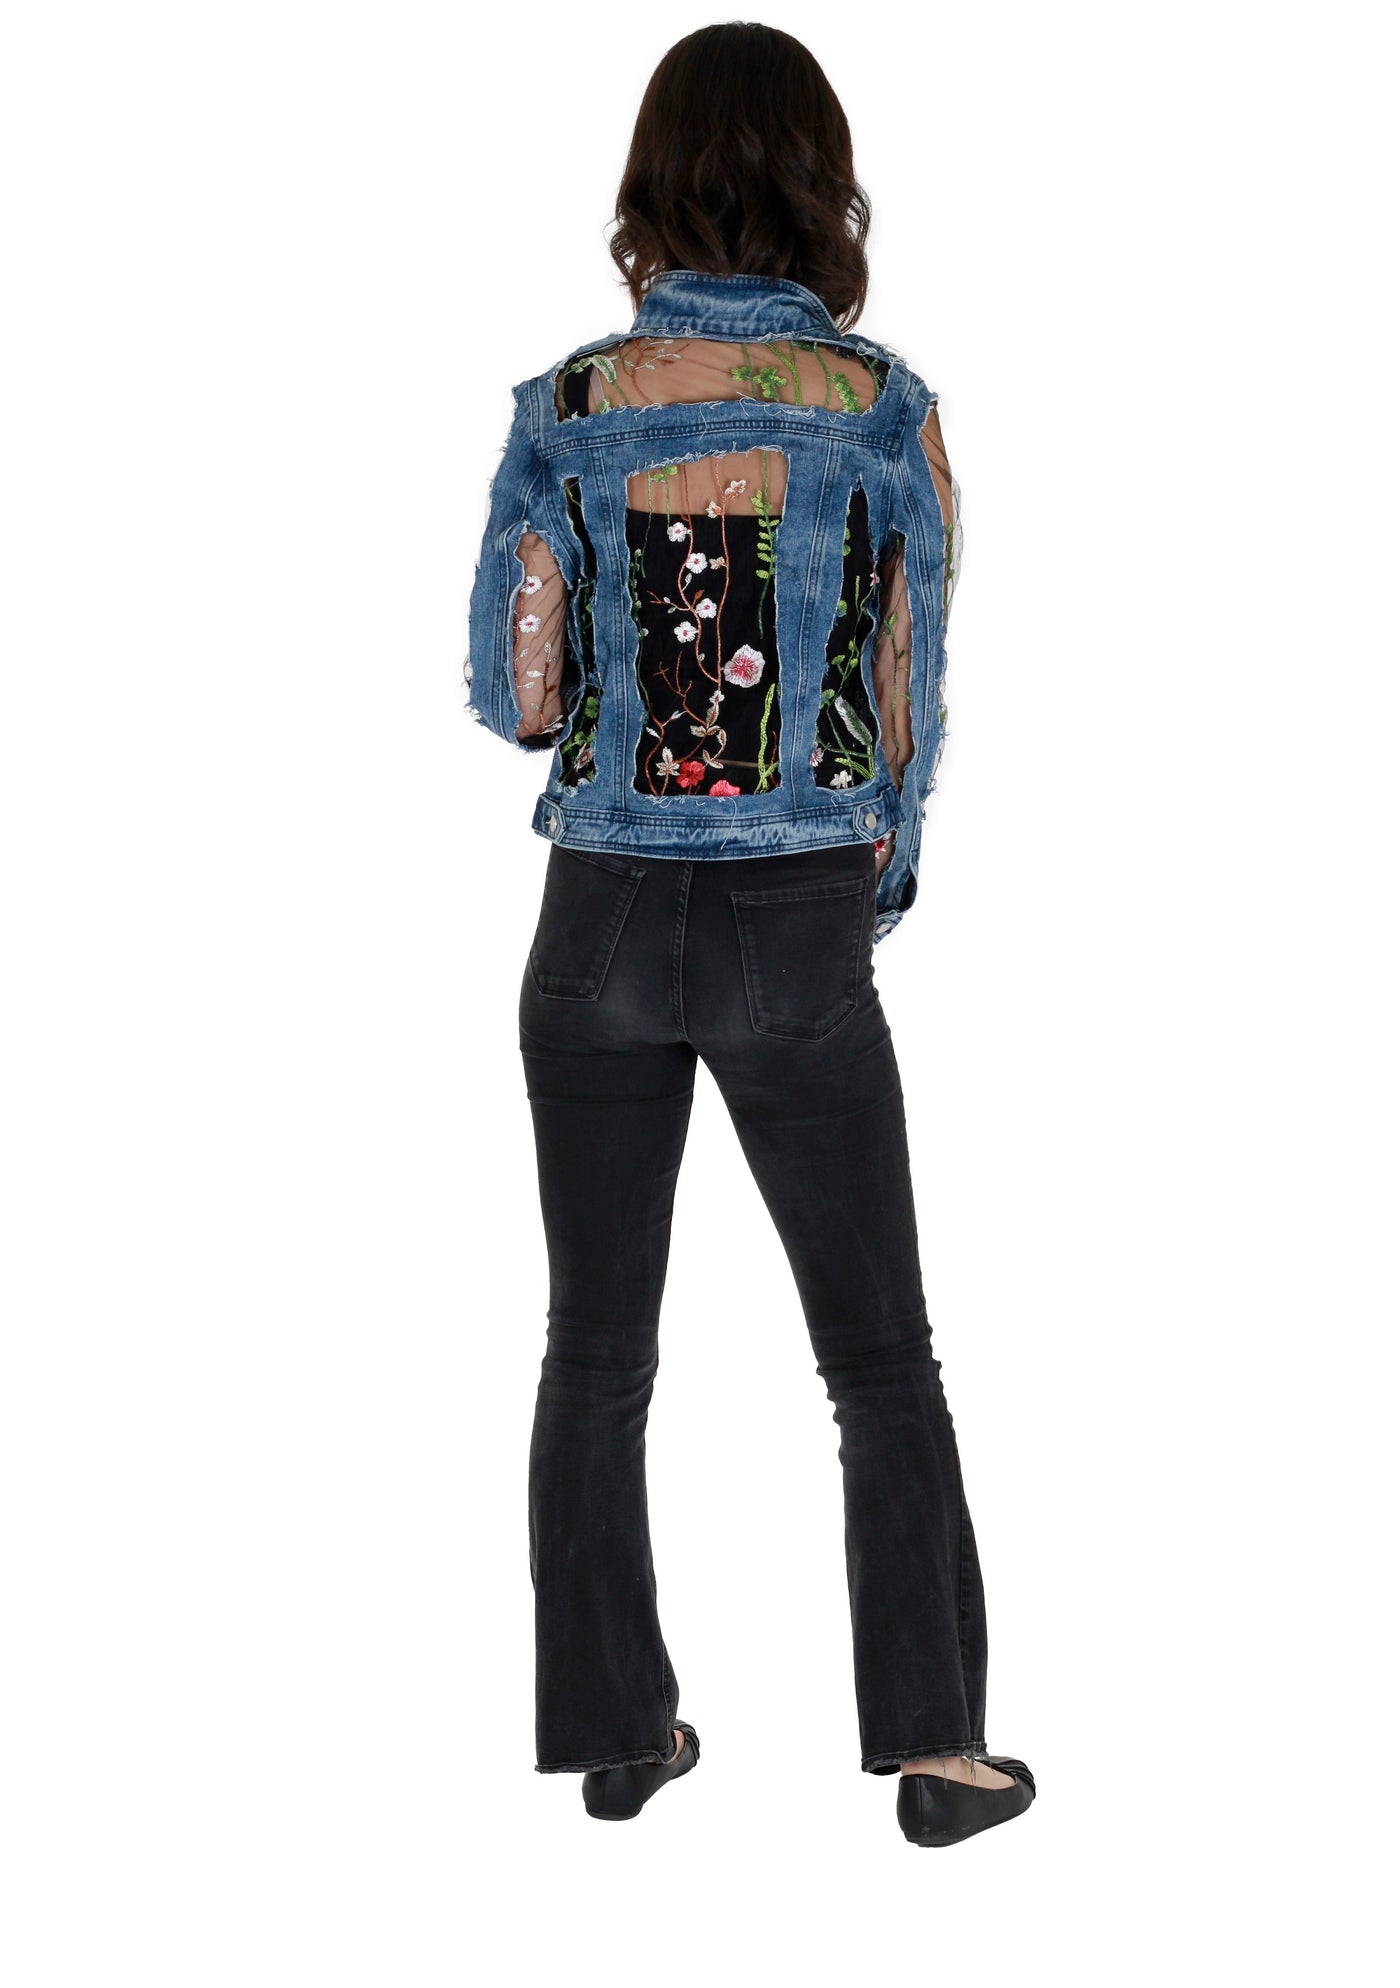 Vintage Denim Jacket features a mesh panel with floral embroidery detailing